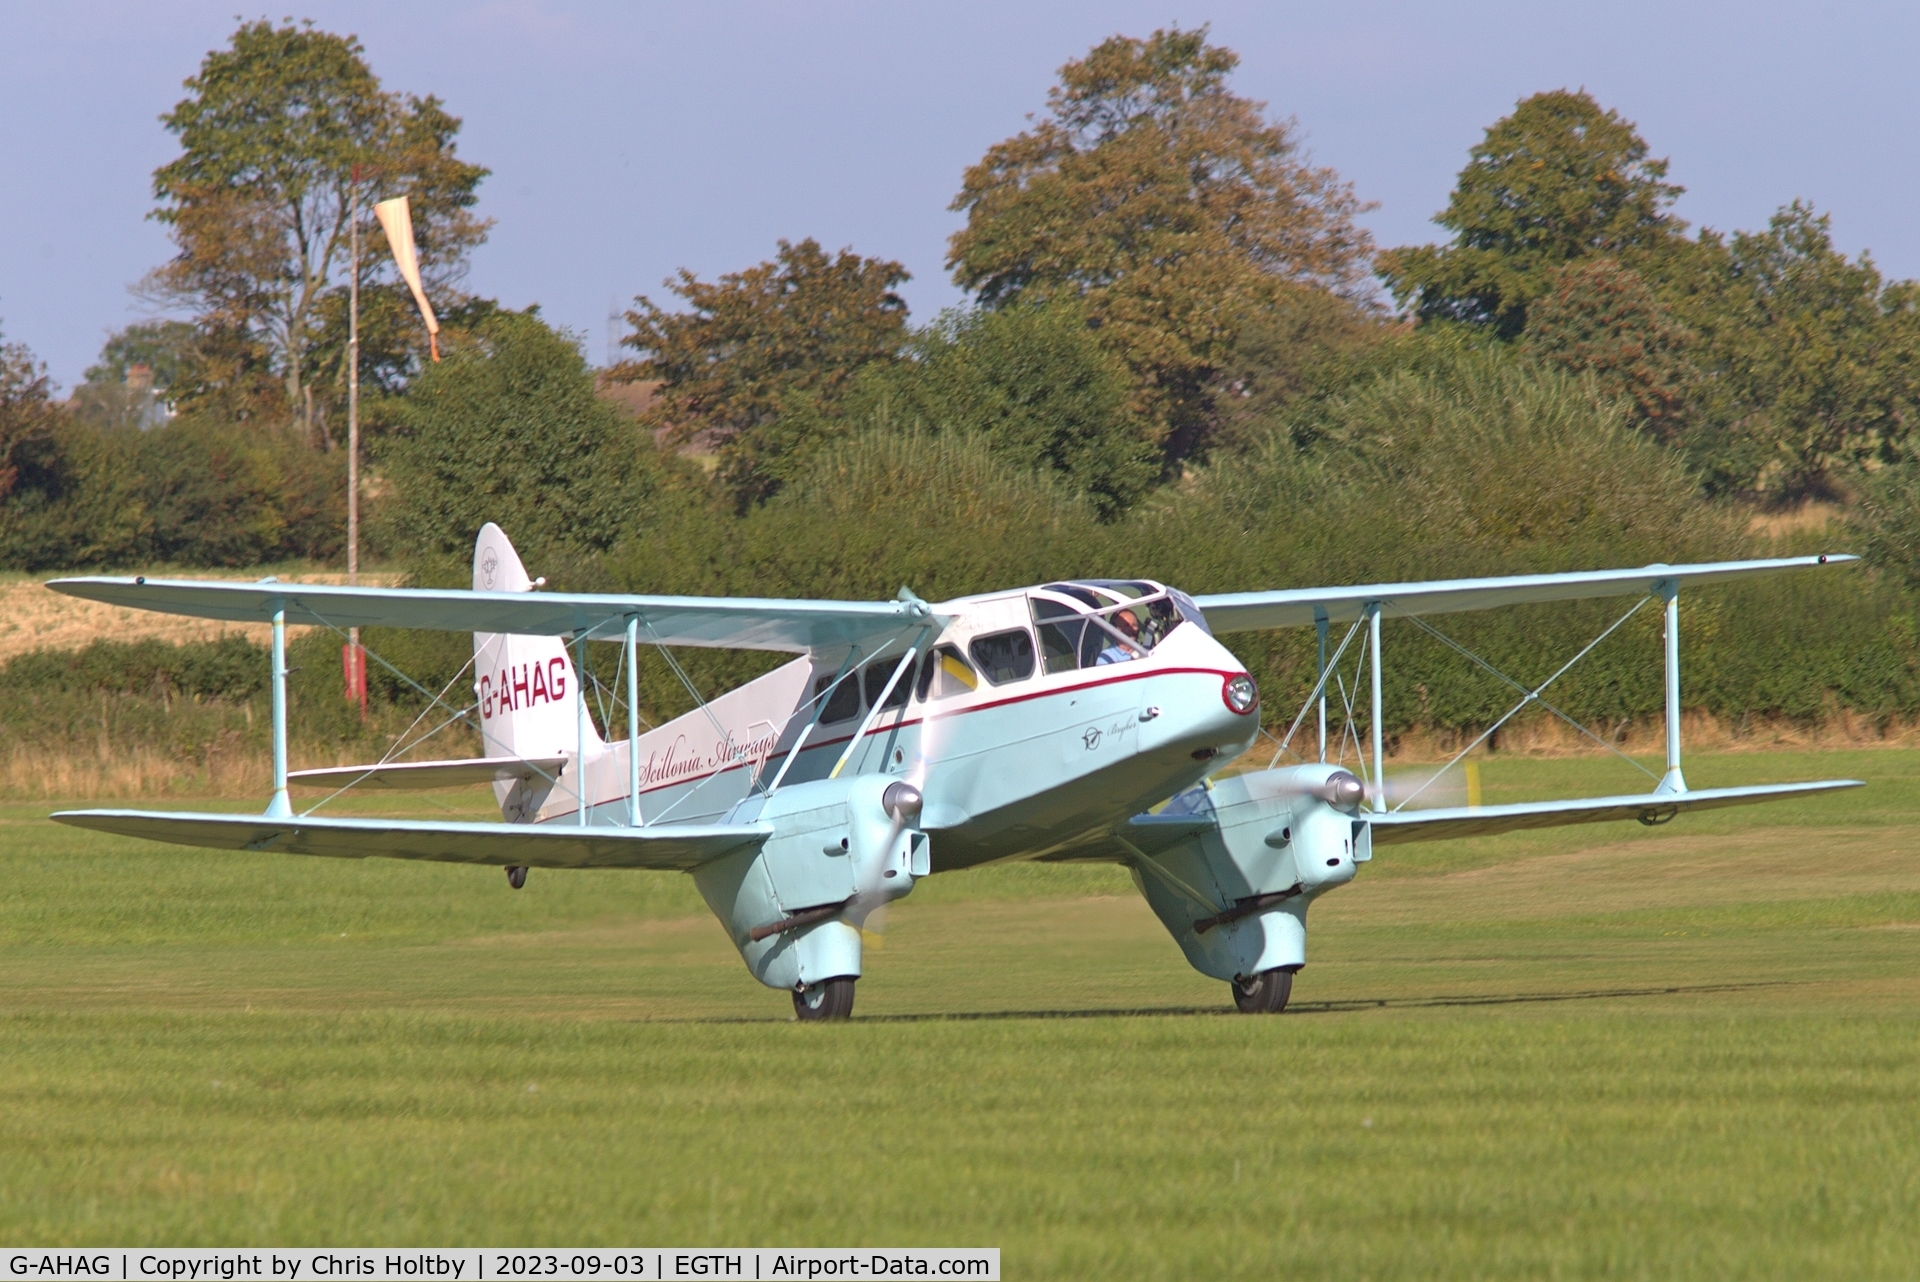 G-AHAG, 1945 De Havilland DH-89A Dominie I/Dragon Rapide C/N 6926, Taking off for another pleasure flight at Old Warden